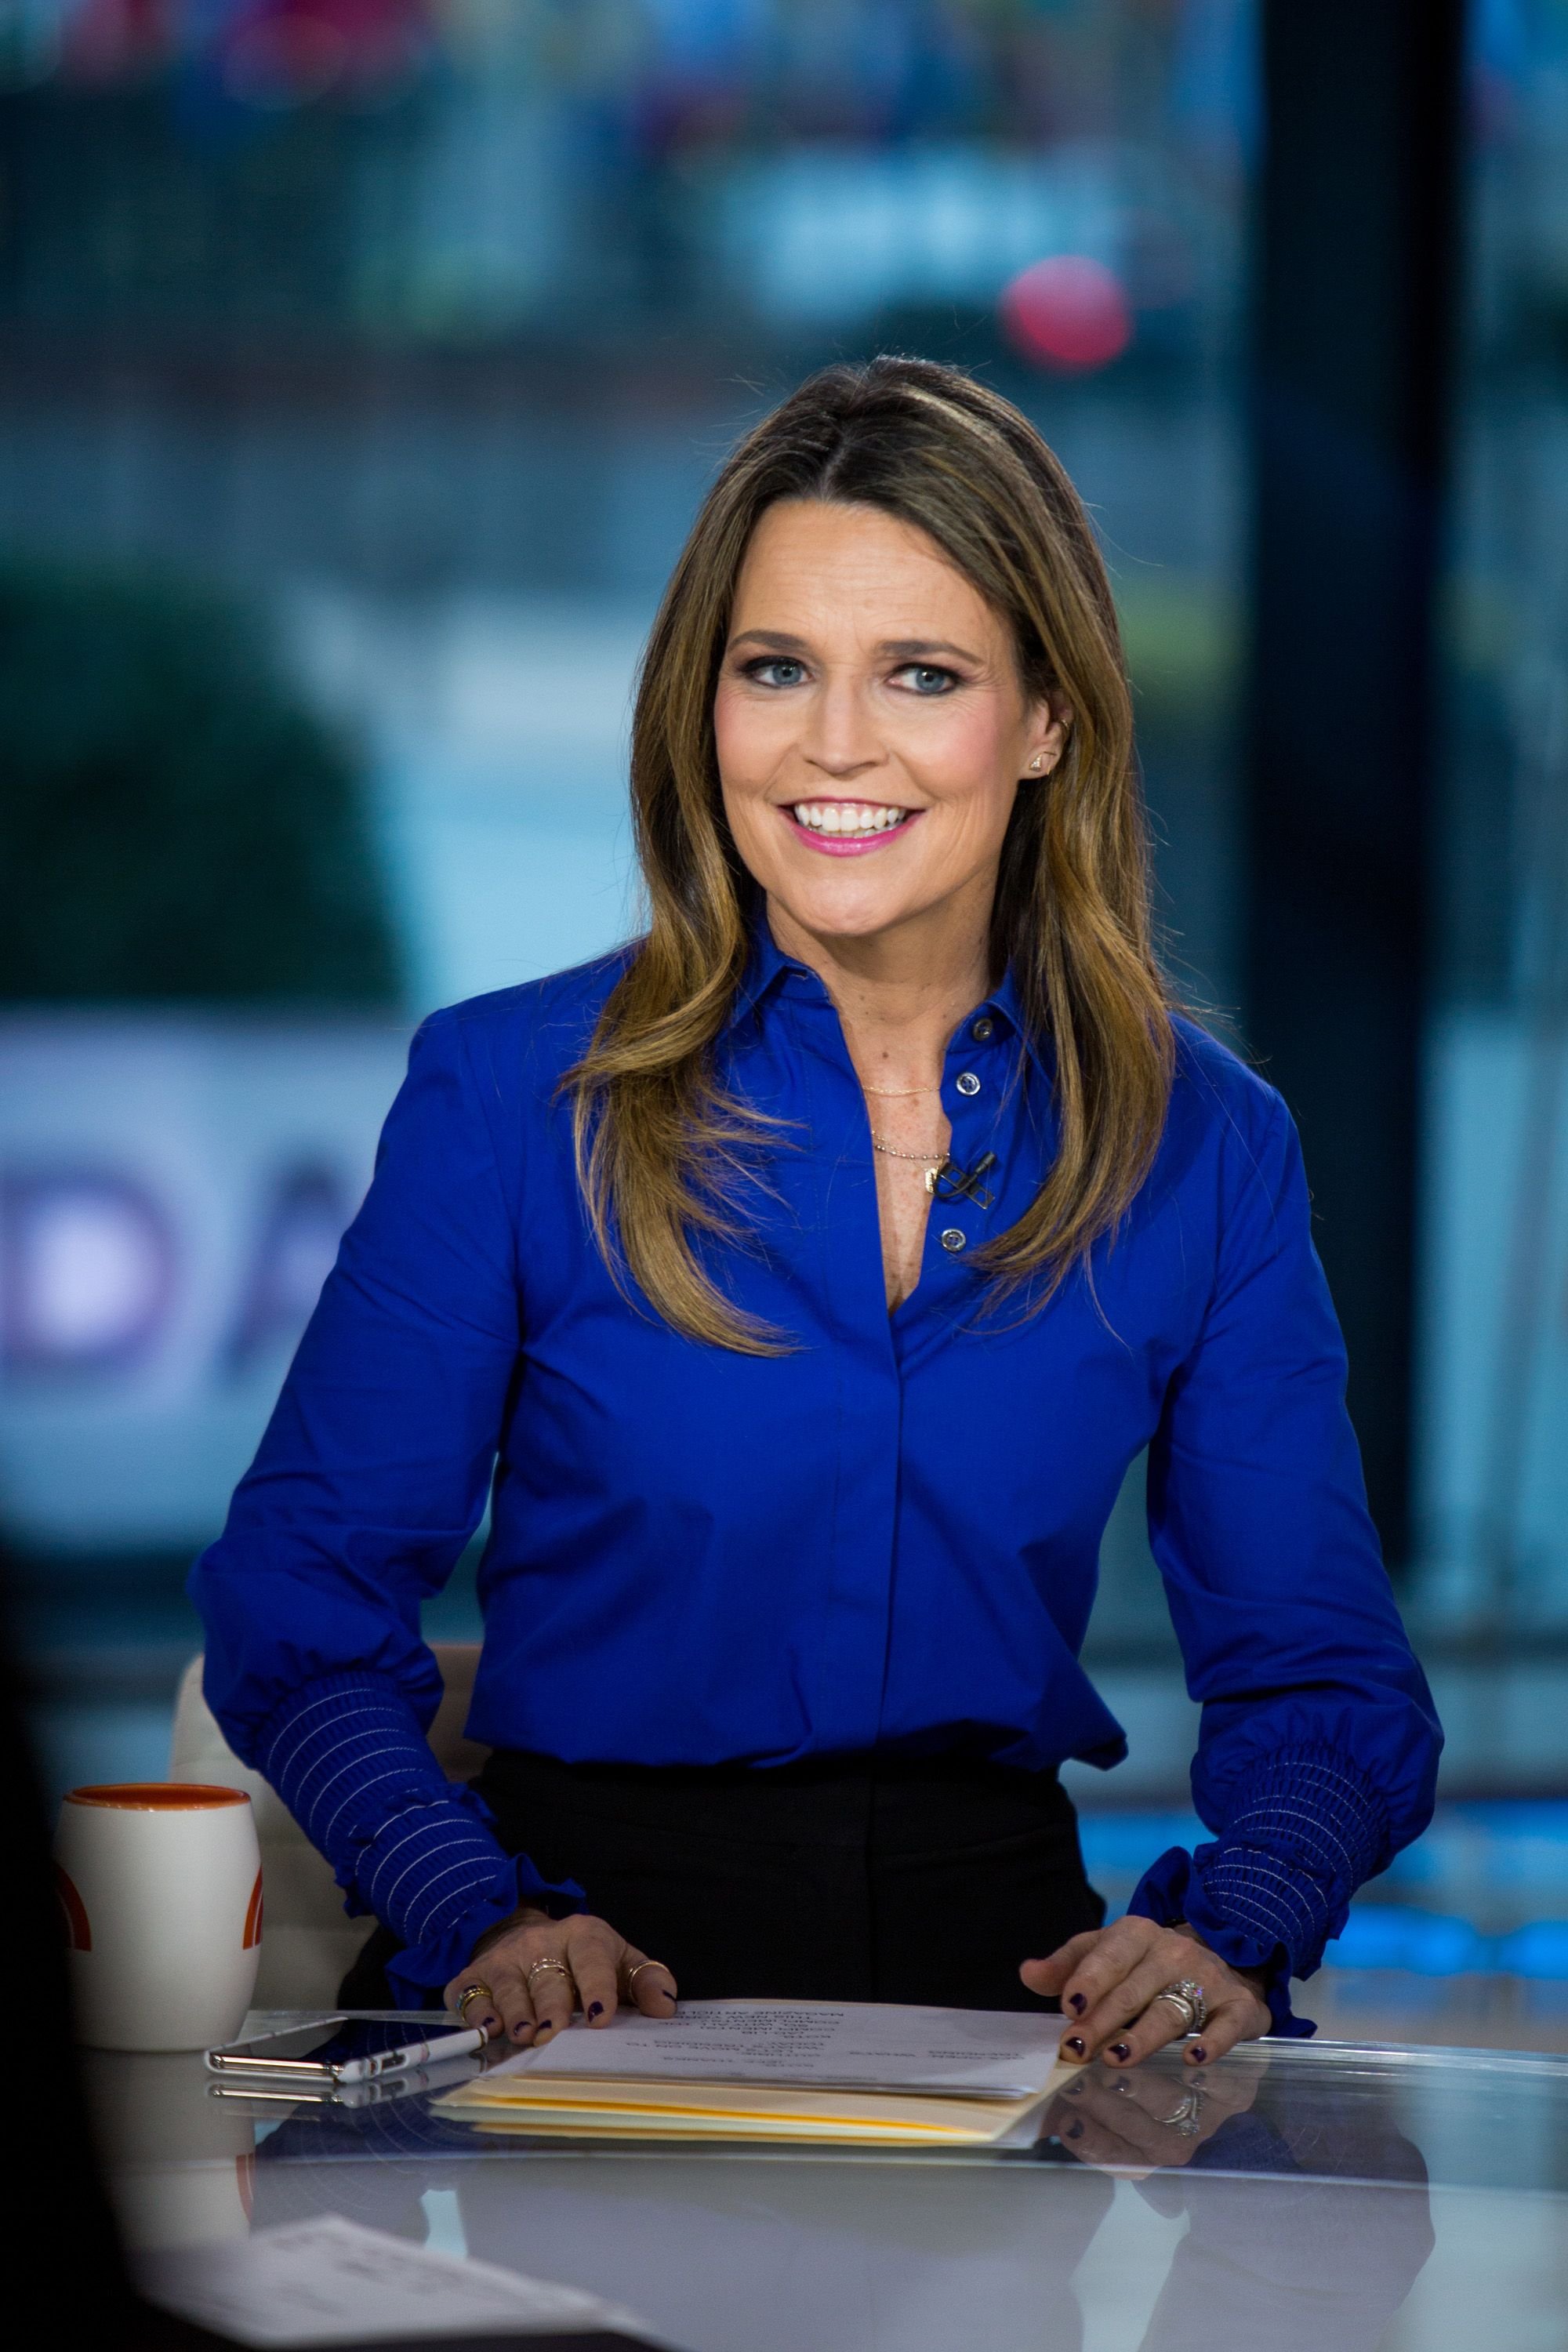 Savannah Guthrie on season 67 of the "Today" show on January 18, 2018 | Photo: Nathan Congleton/NBCU Photo Bank/NBCUniversal/Getty Images